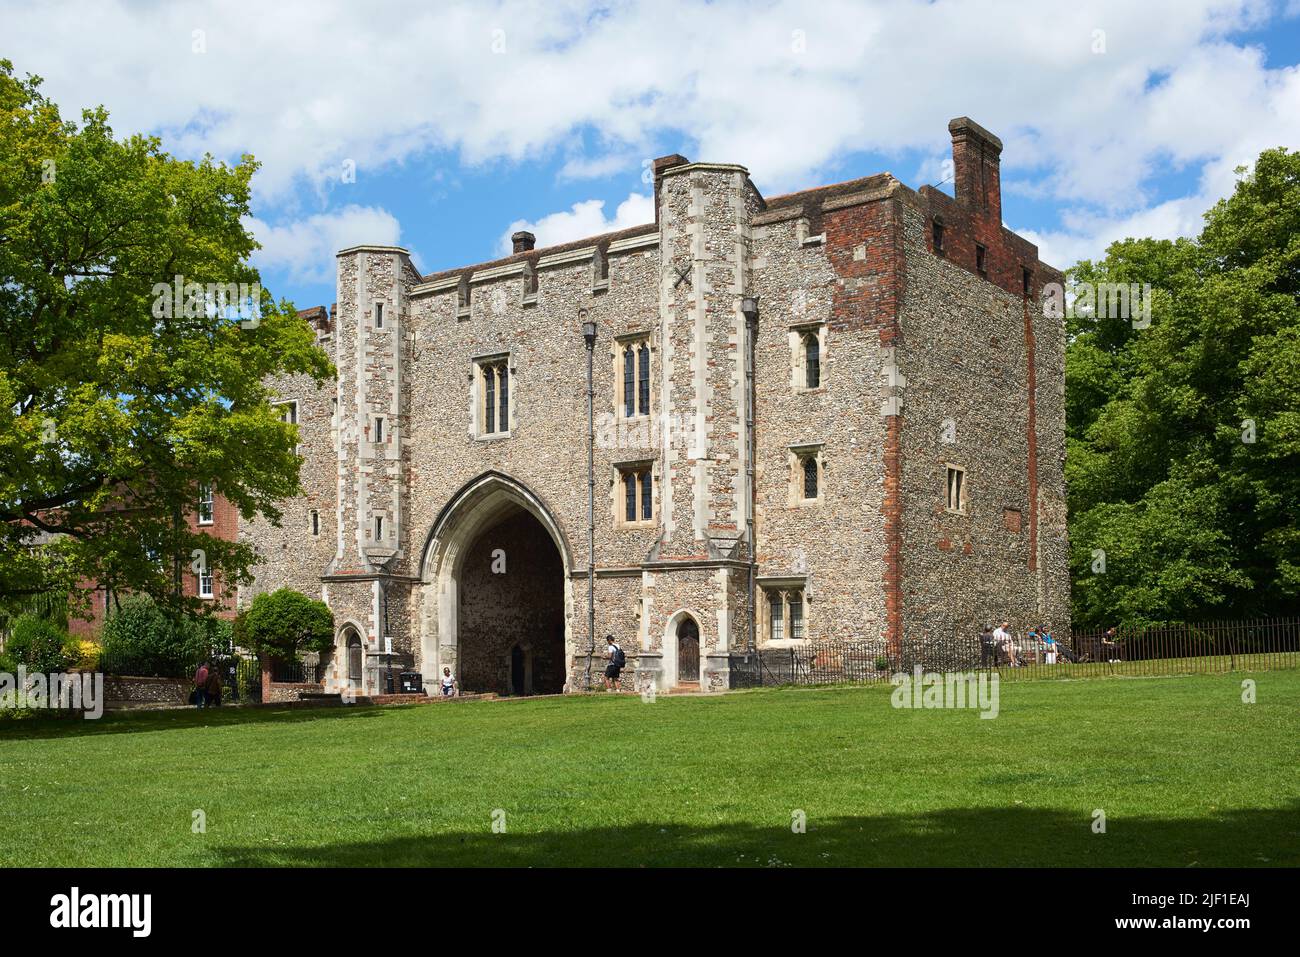 The medieval gateway of St Albans Abbey in the grounds of the cathedral, St Albans, Hertfordshire, South East England Stock Photo